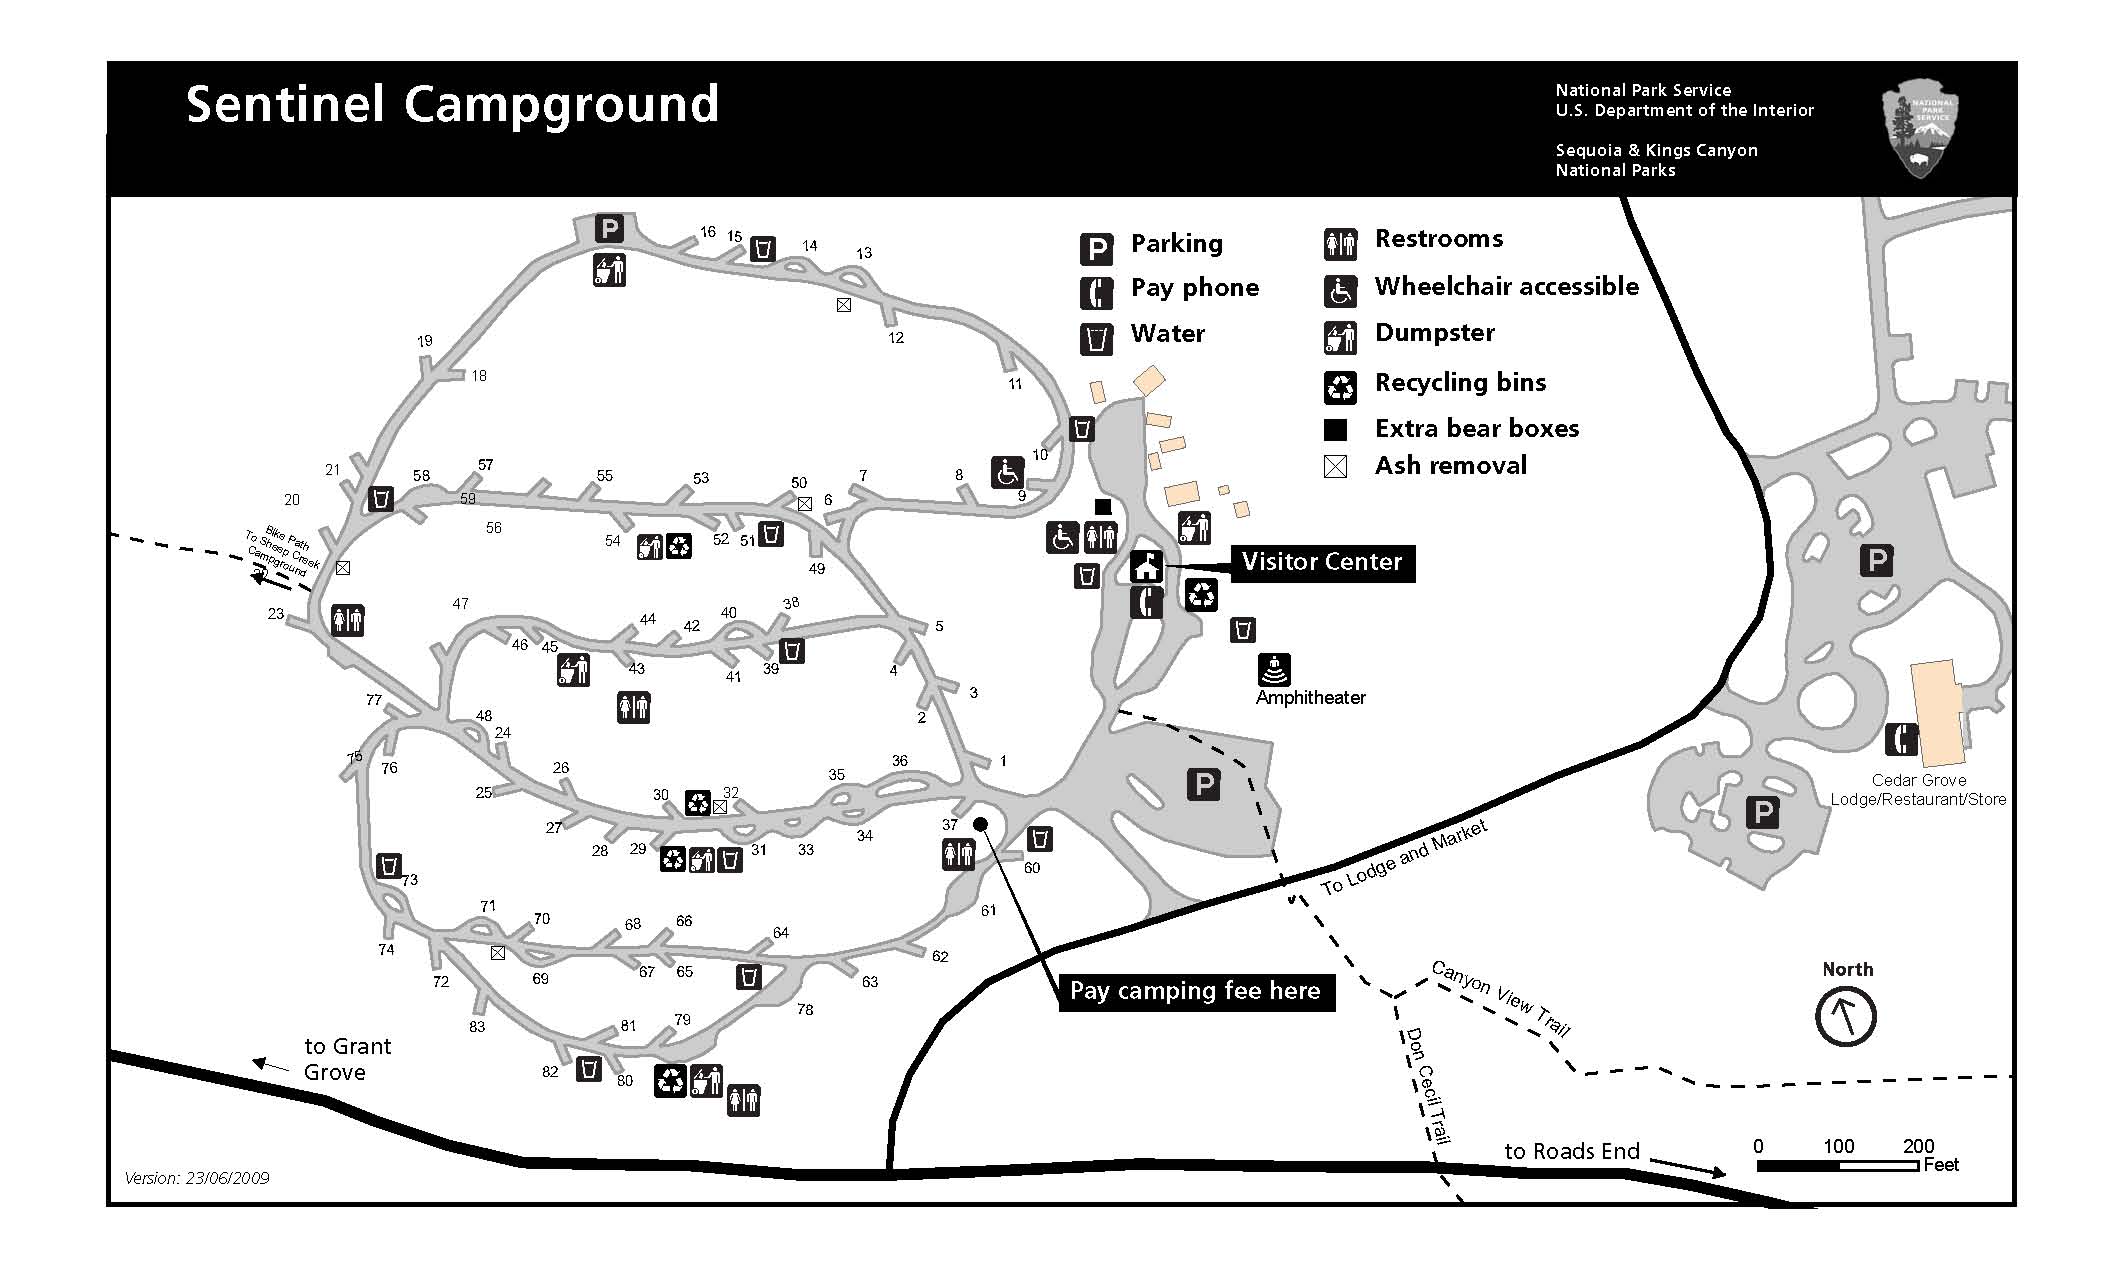 Sentinel Campground - Sequoia & Kings Canyon National Parks (U.S